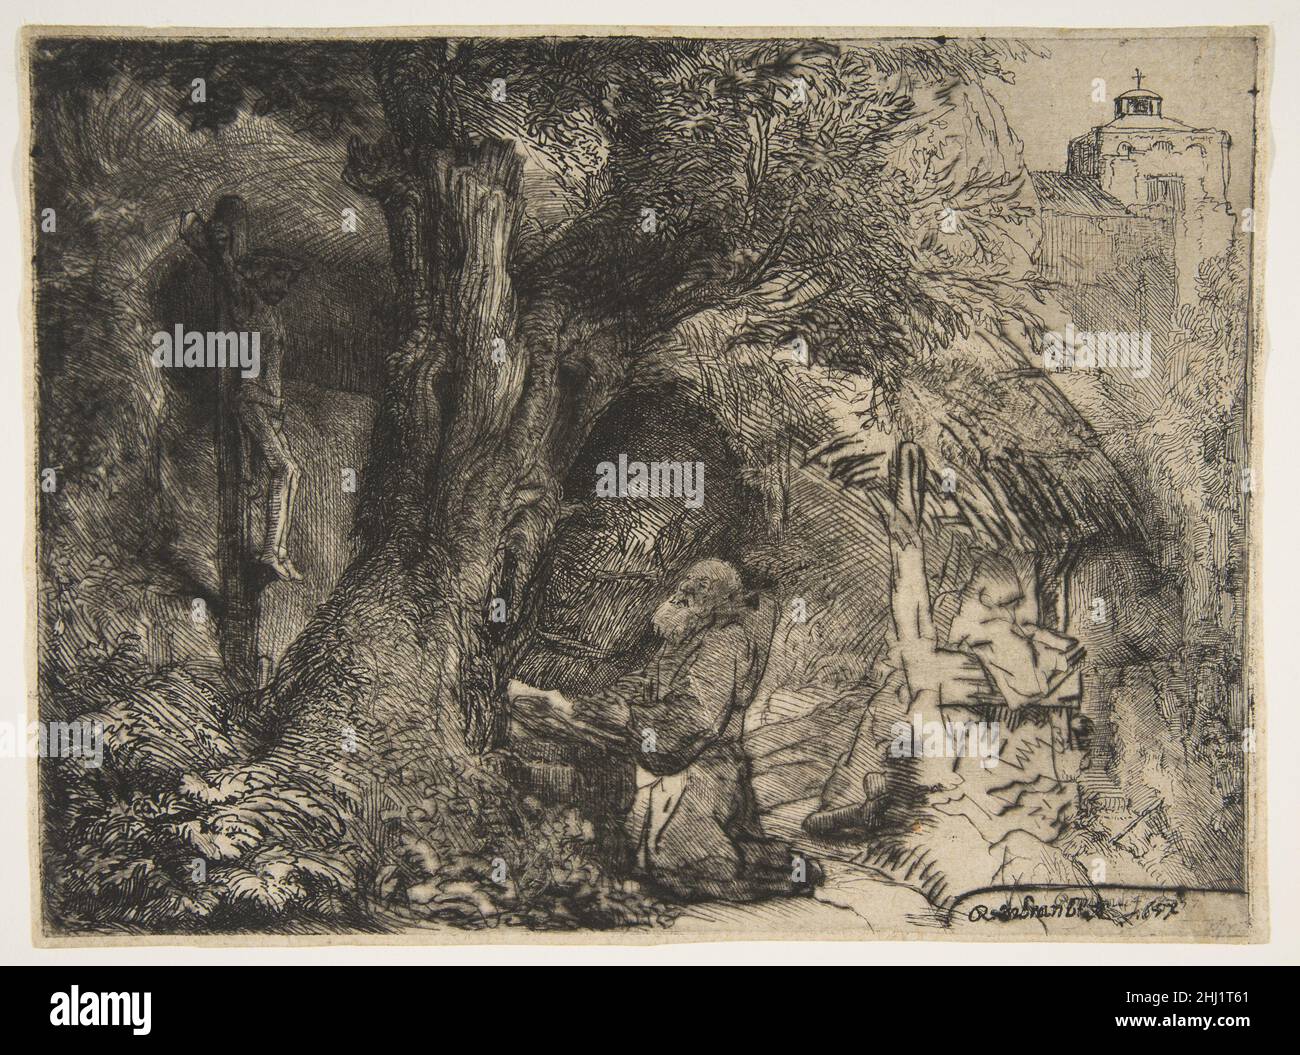 Saint Francis beneath a Tree, Praying 1657 Rembrandt (Rembrandt van Rijn) Dutch Rembrandt worked on this print in two campaigns in the same year. He began the print in drypoint, delineating only the tree, the saint, the crucifix, and the monk in the background on the right. He even signed the print at that point—his signature is still visible underneath the final larger and darker signature. The second state, shown here, is more finished, with details such as the tower in the background, foliage in the lower left, and the area between Saint Francis and the tree trunk added in etching. Rembrand Stock Photo